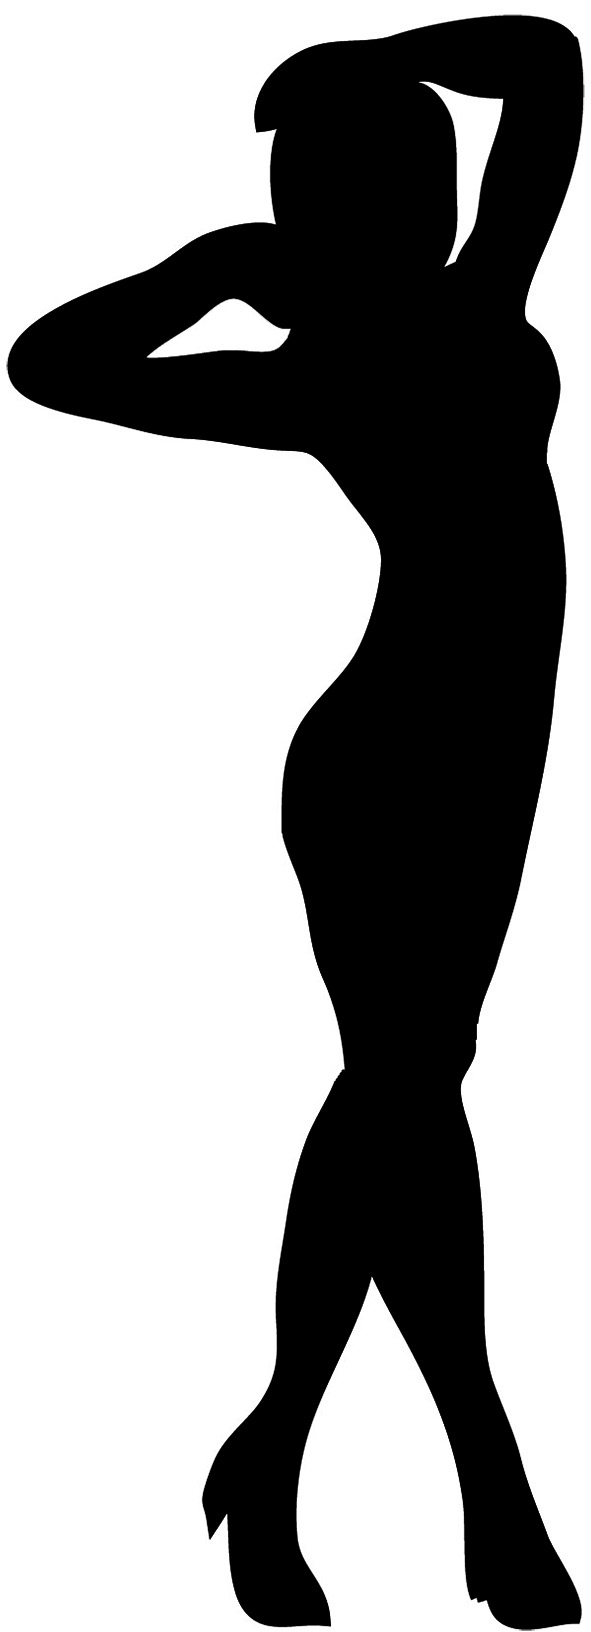 Woman silhouette clipart .